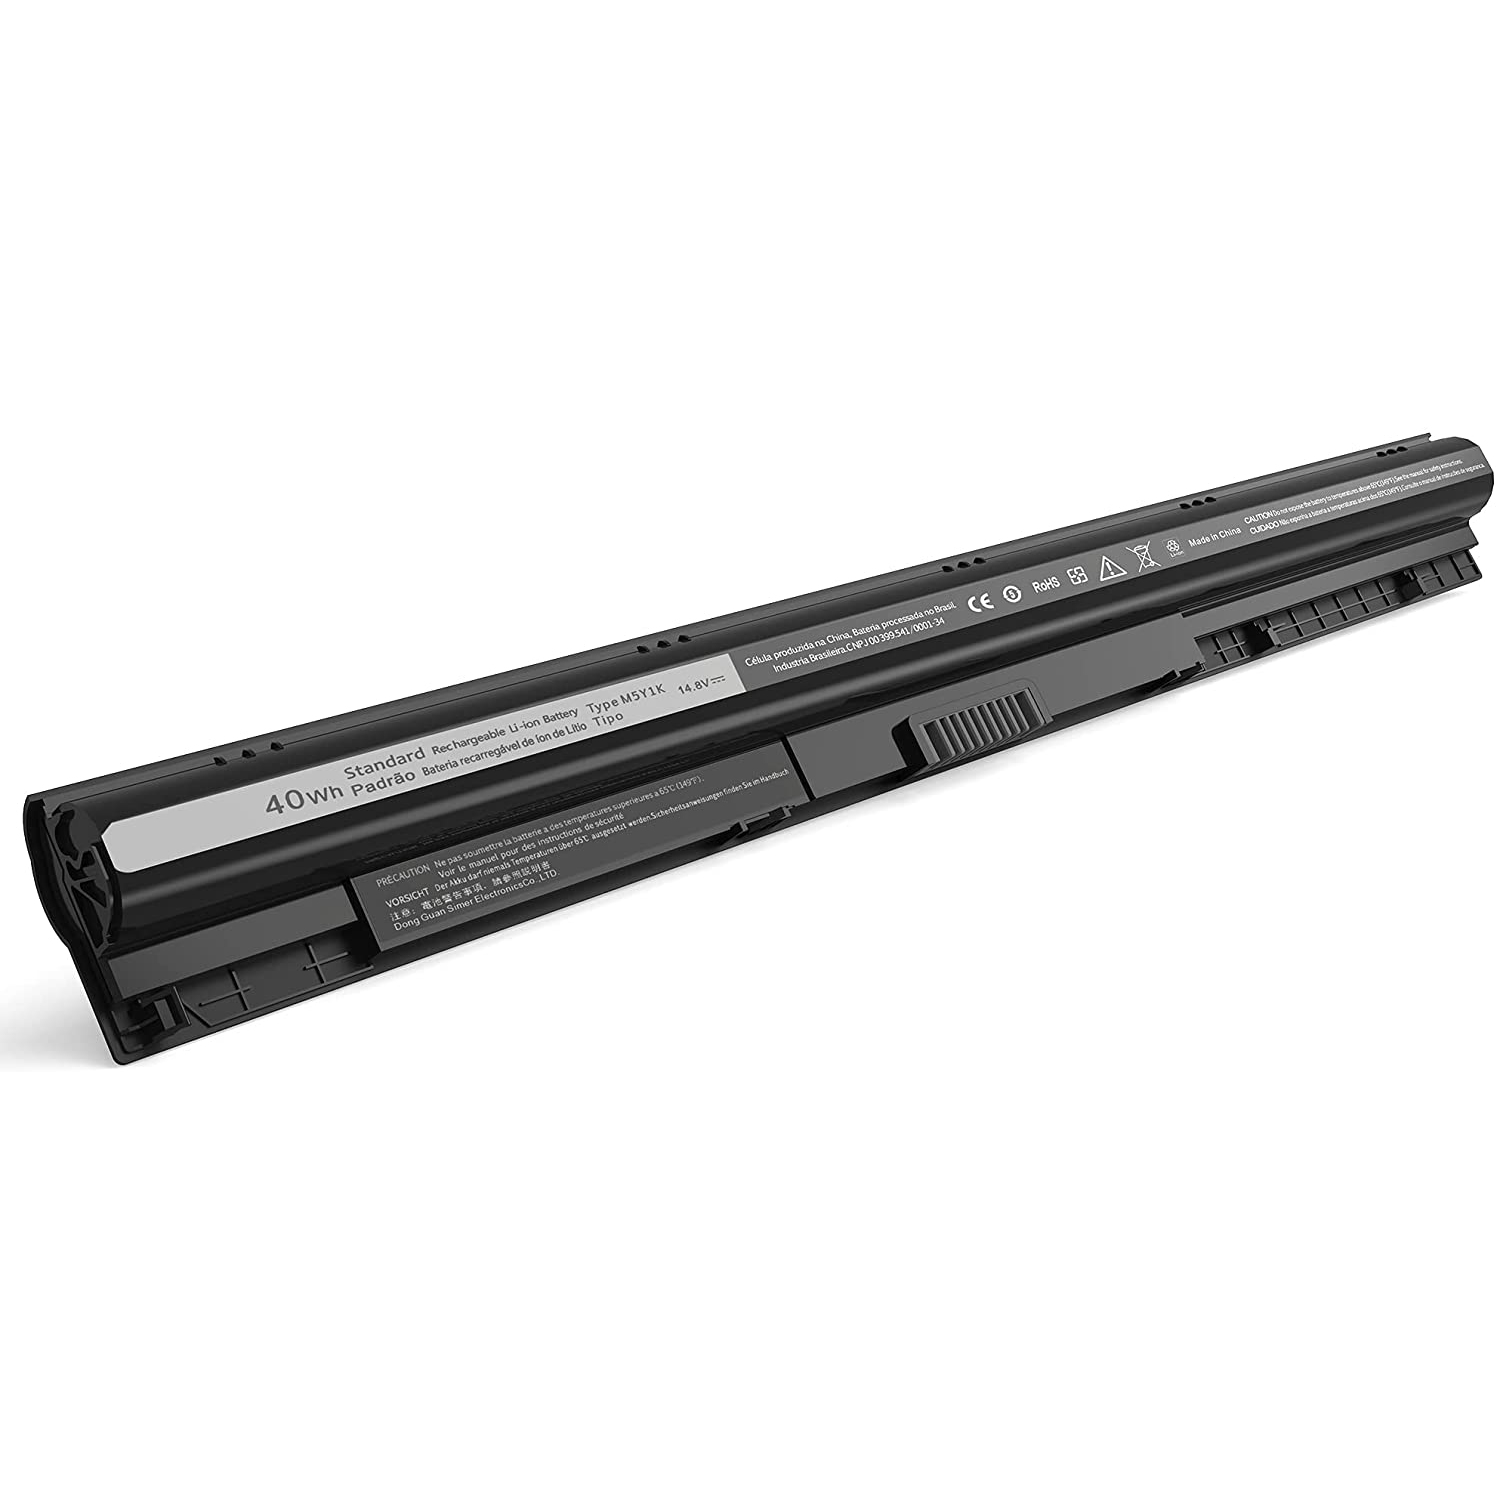 New M5Y1k Laptop Battery 14.8V 40WH For DELL Inspiron 3451 3551 5558 5758 M5Y1K Vostro 3458 3558 Inspiron 14 15 3000